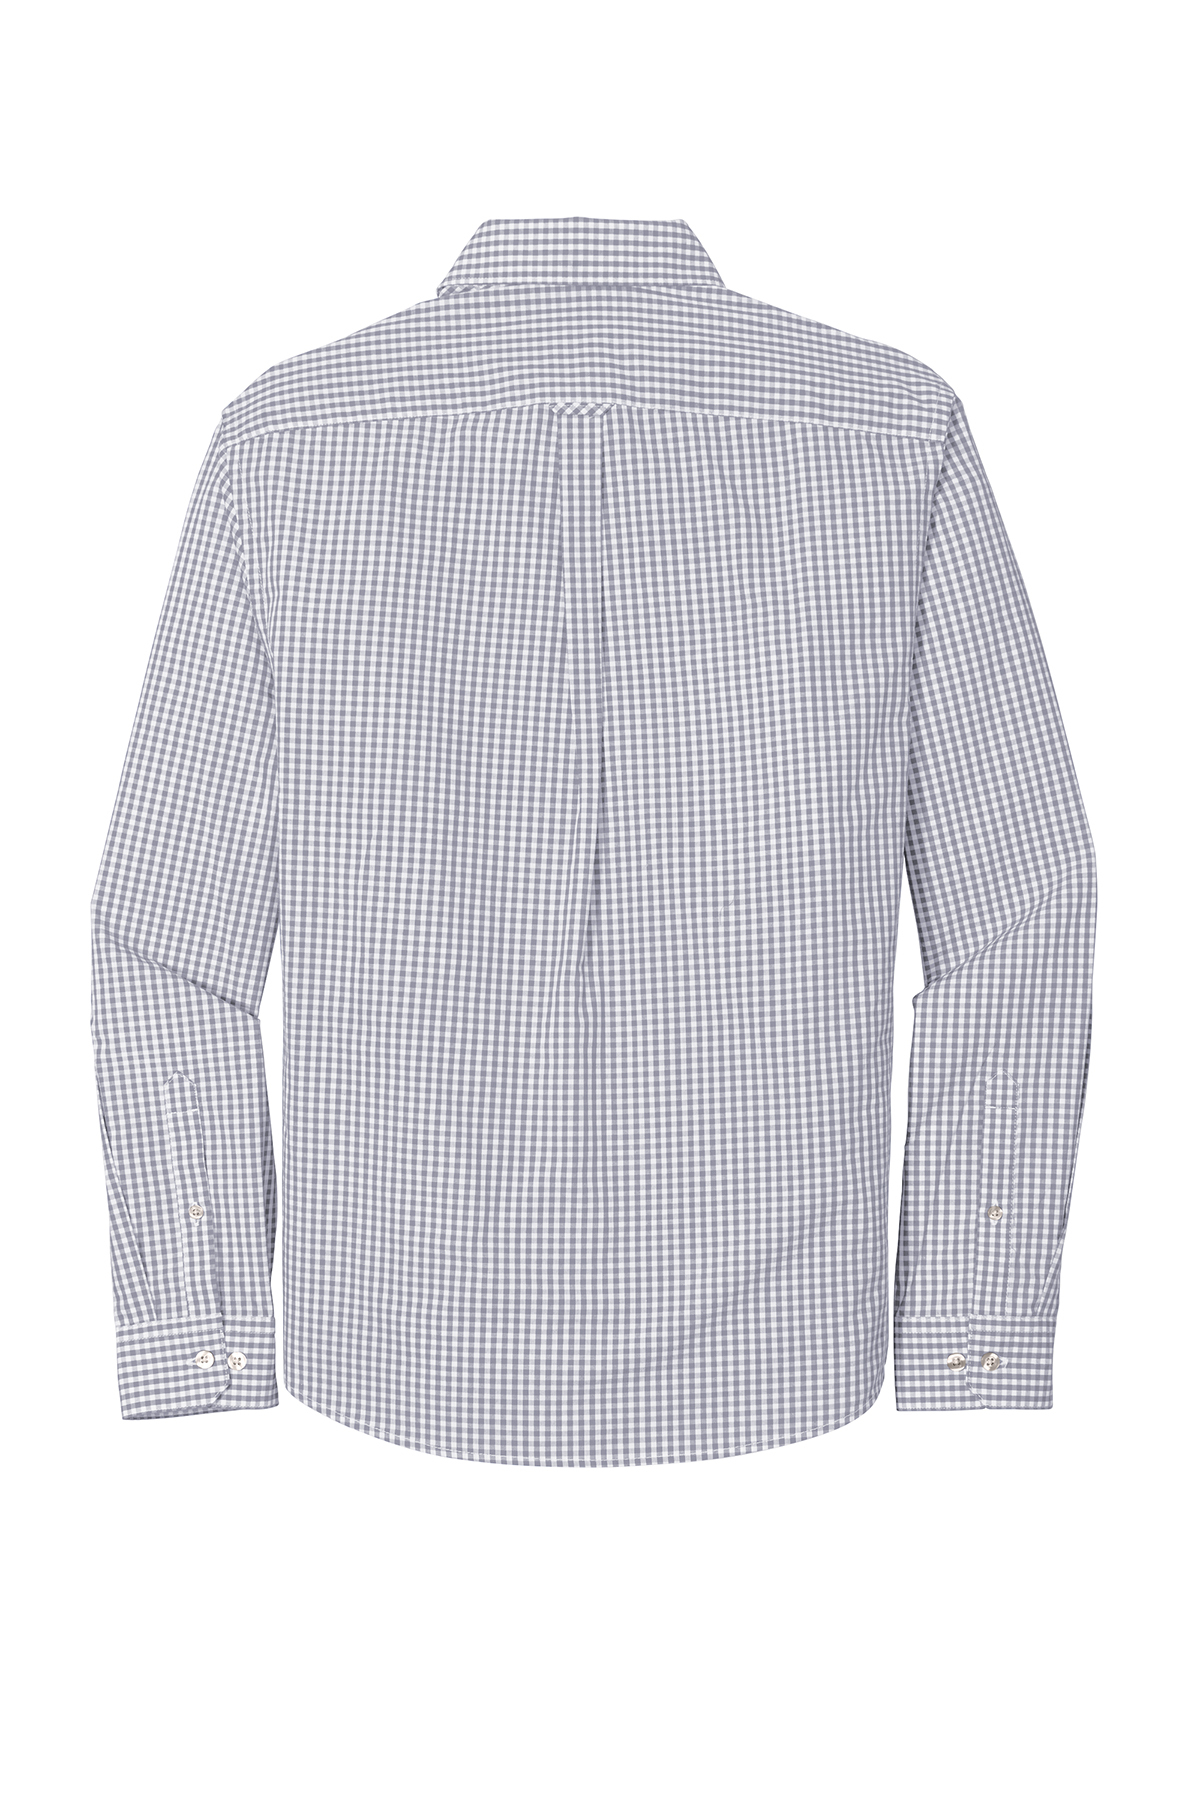 Port Authority Broadcloth Gingham Easy Care Shirt | Product | Company ...